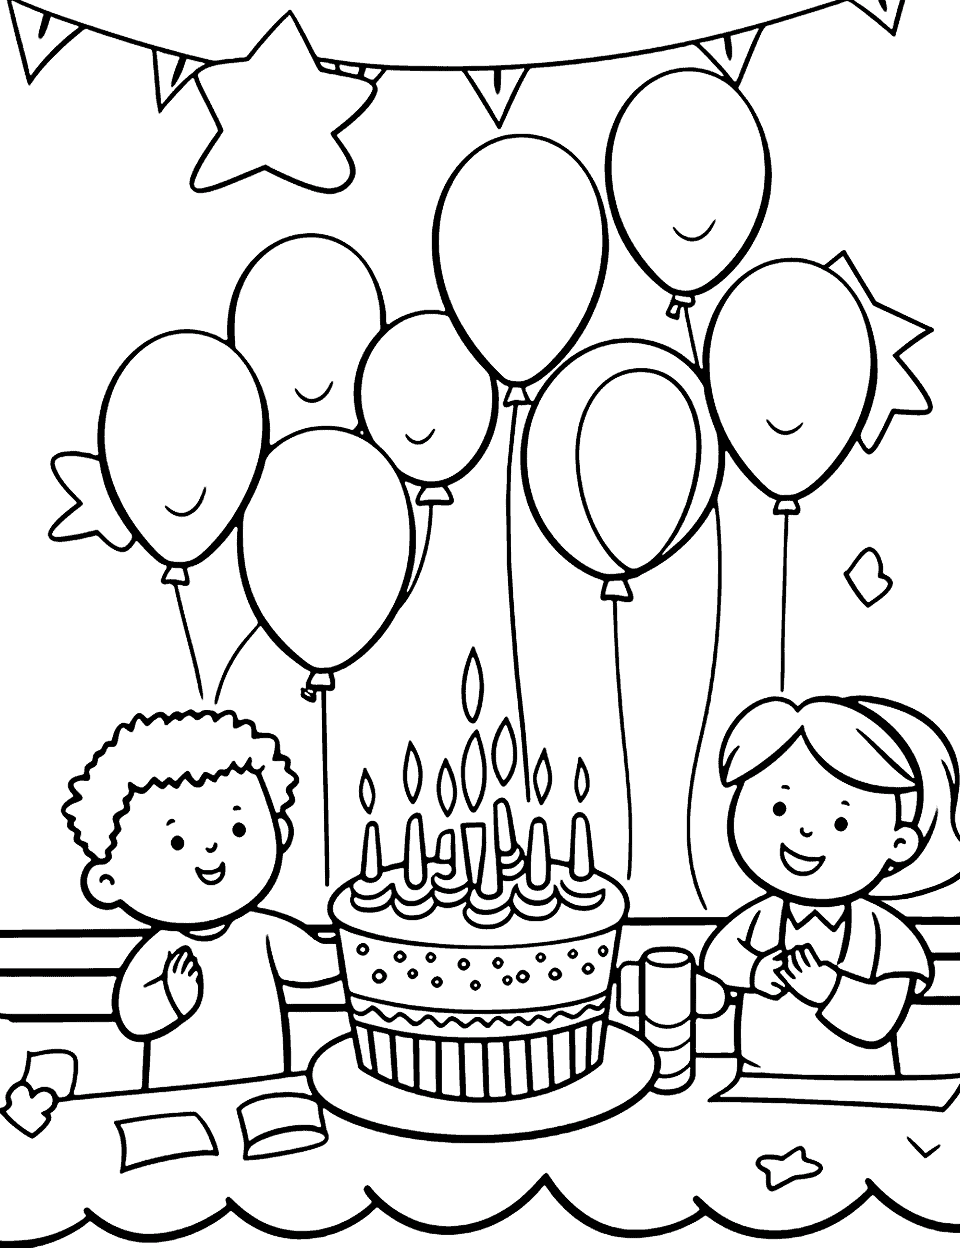 Easy Birthday Party Scene Happy Coloring Page - A simple drawing of a birthday party scene – a cake, a few balloons, and a birthday banner.